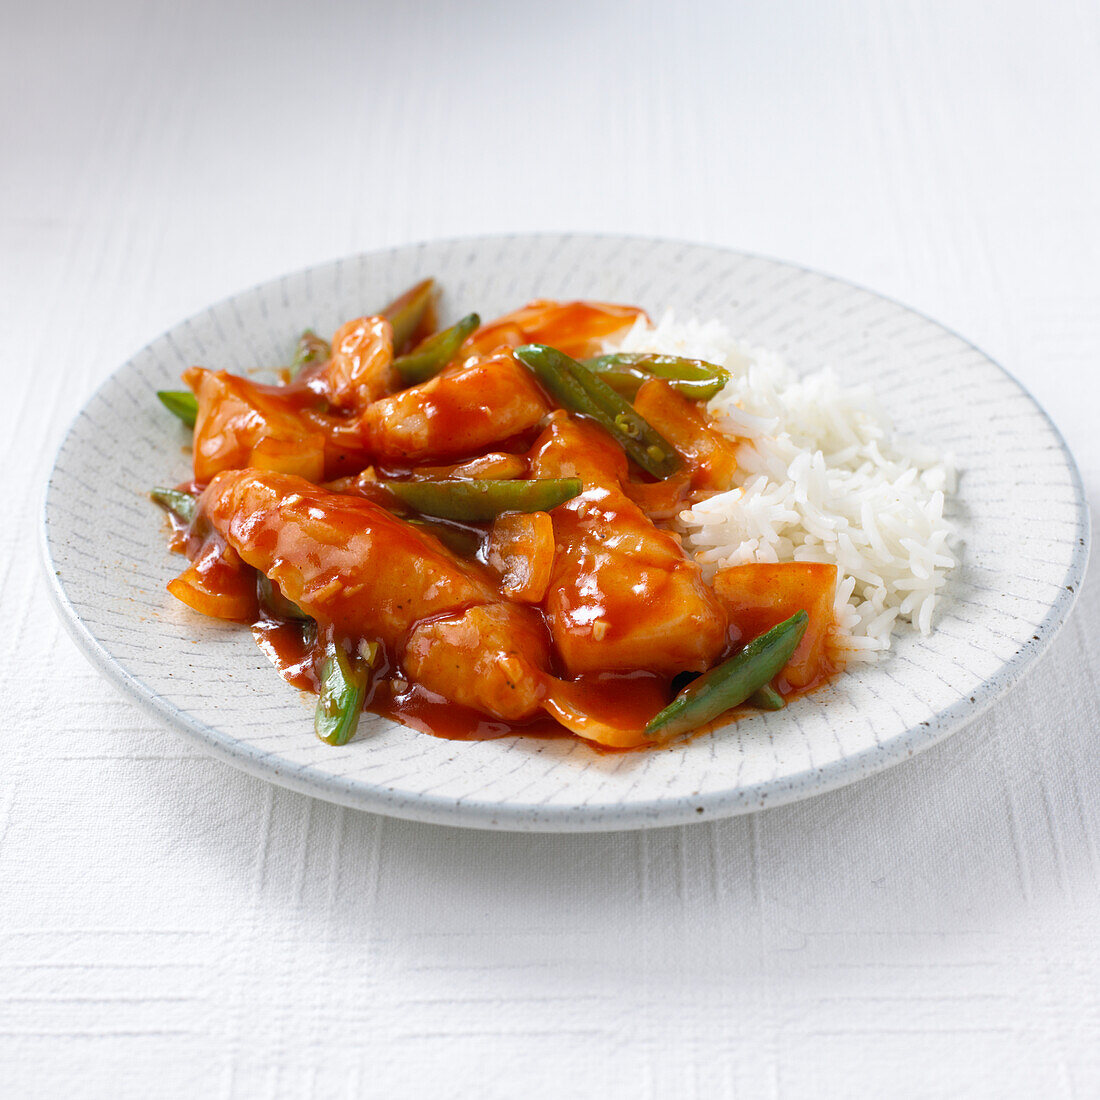 Sweet and sour stir-fried fish with ginger